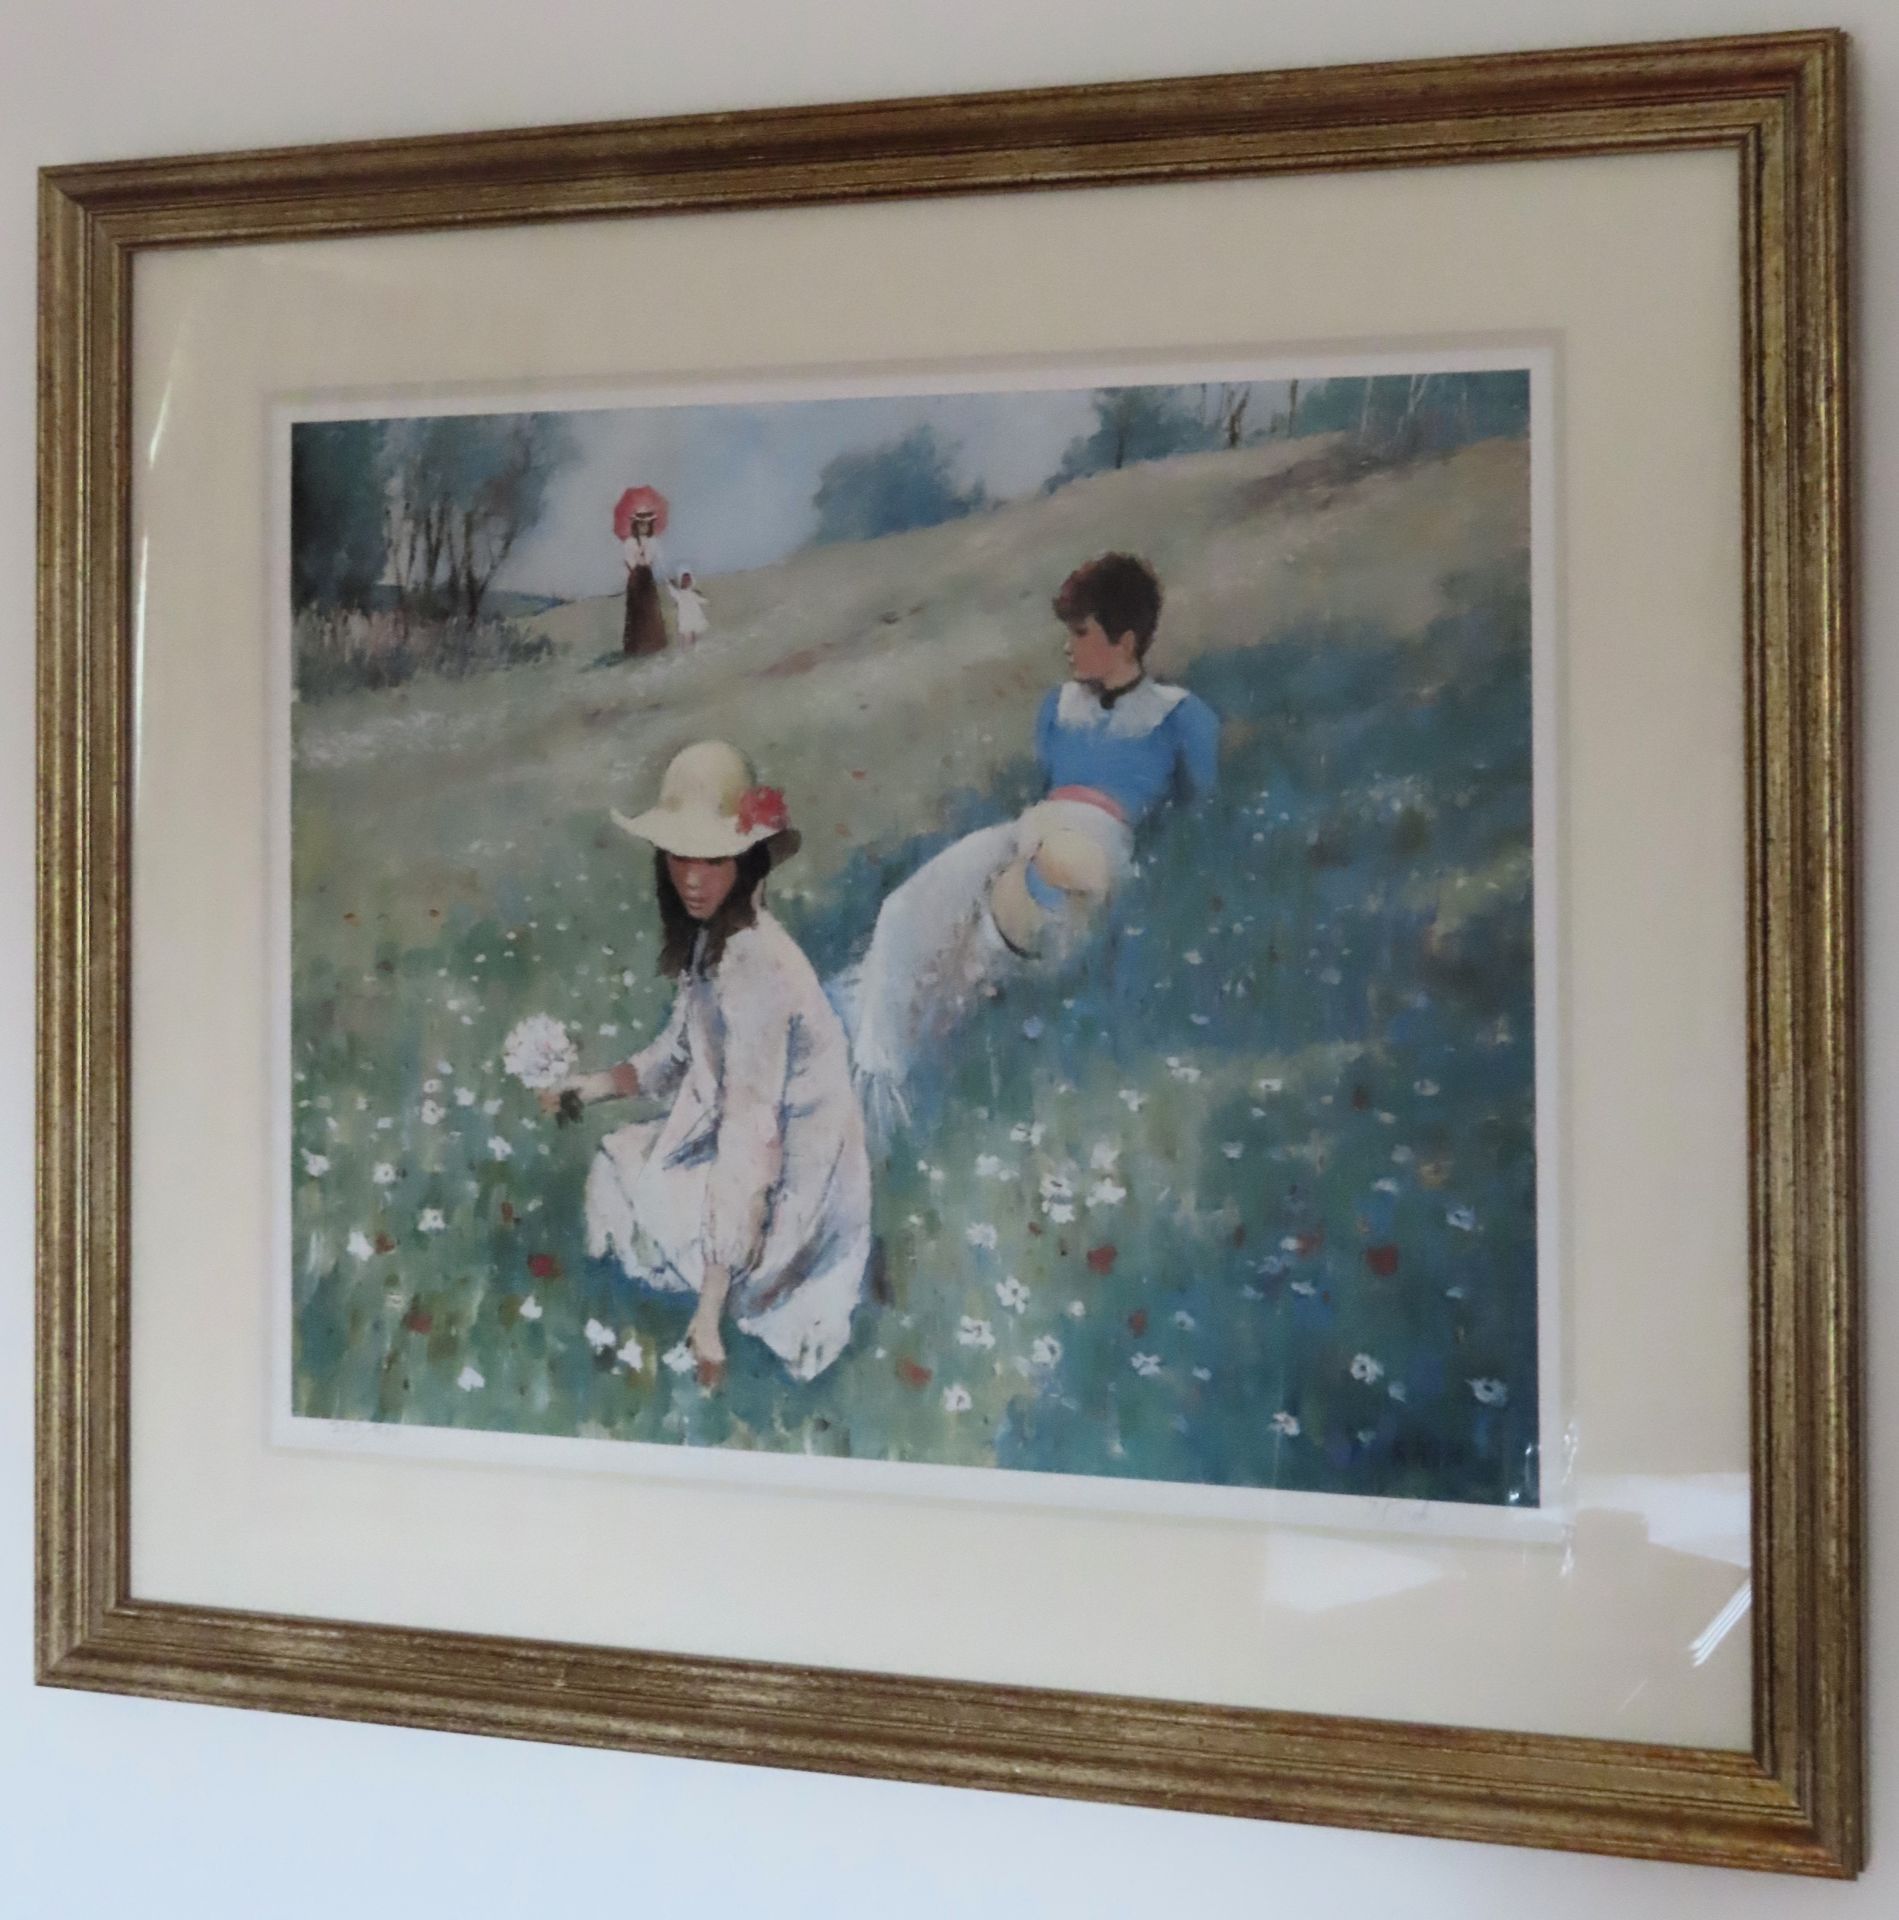 J Durkin - Framed pencil signed limited edition polychrome print depicting a country scene with